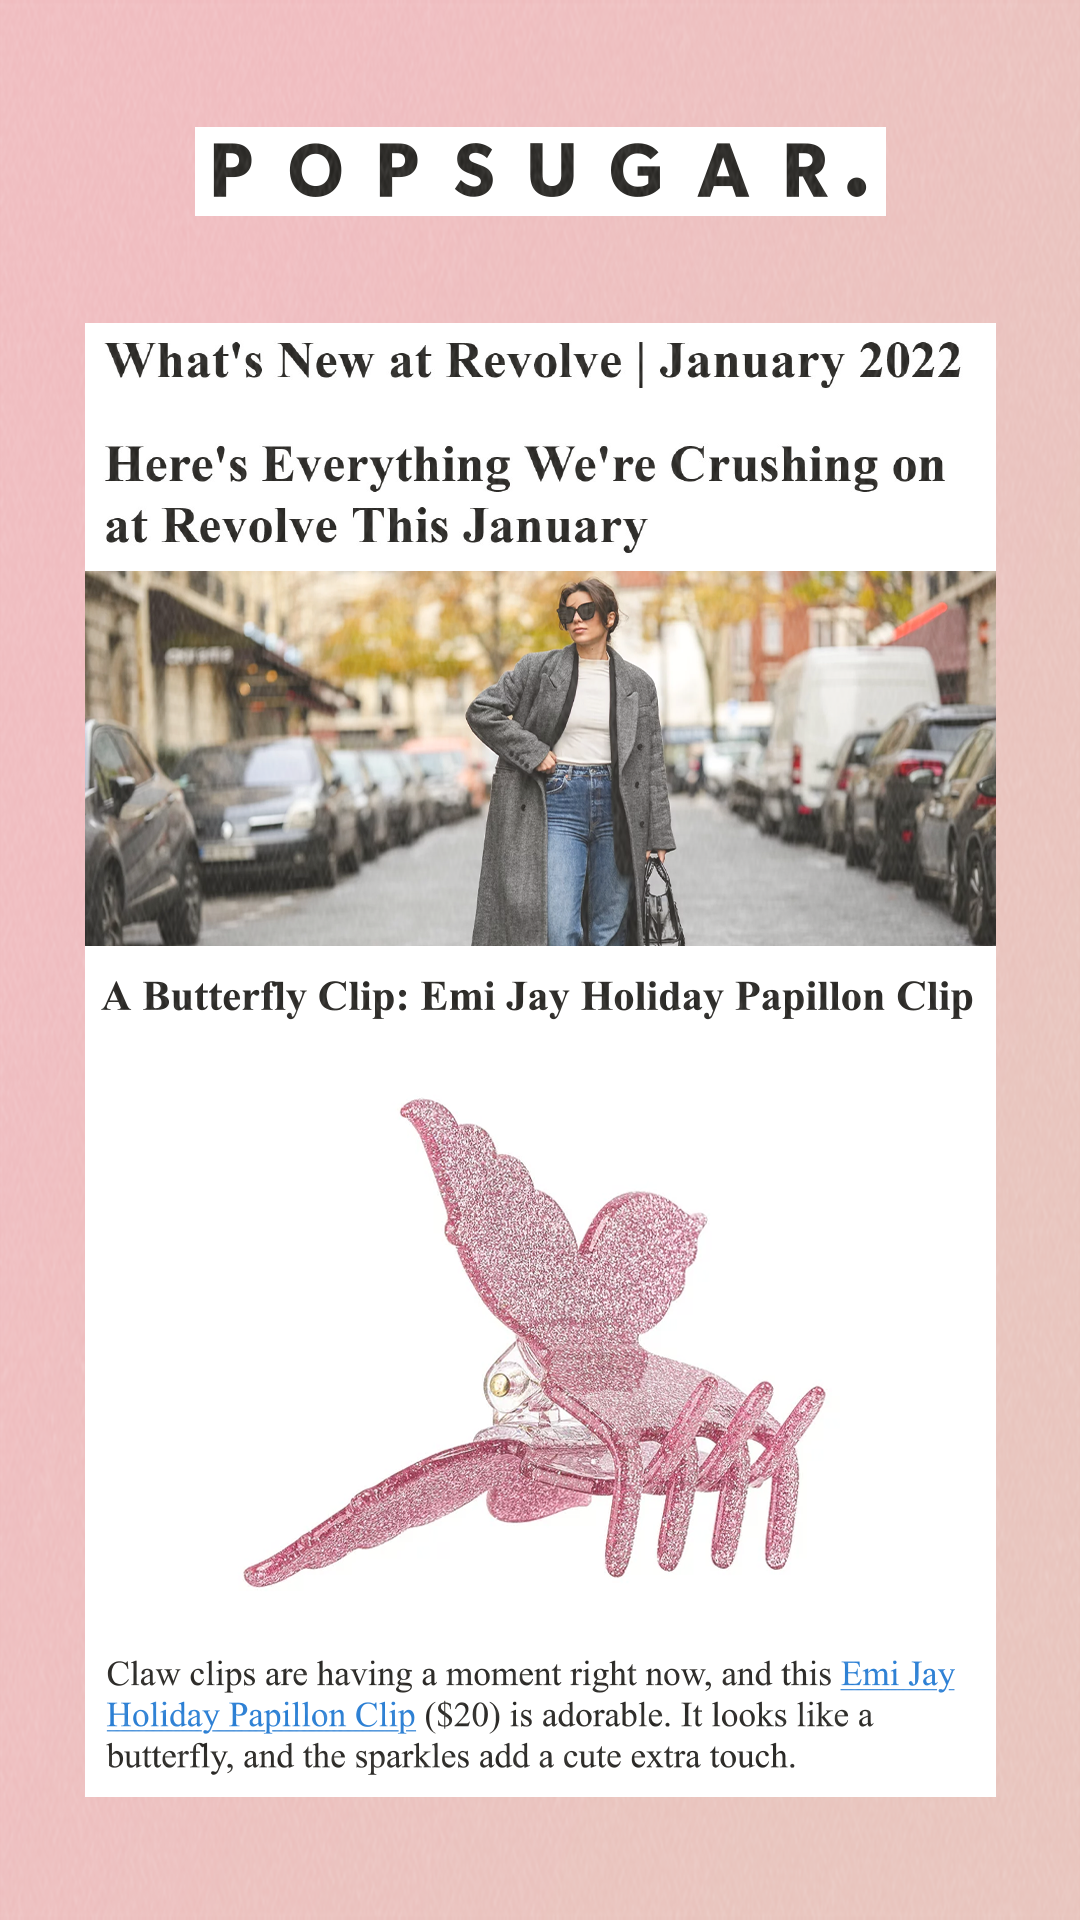 Here's Everything We're Crushing on at Revolve This January A Butterfly Clip: Emi Jay Holiday Papillon Clip Claw clips are having a moment right now, and this Emi Jay Holiday Papillon Clip ($20) is adorable. It looks like a butterfly, and the sparkles add a cute extra touch.